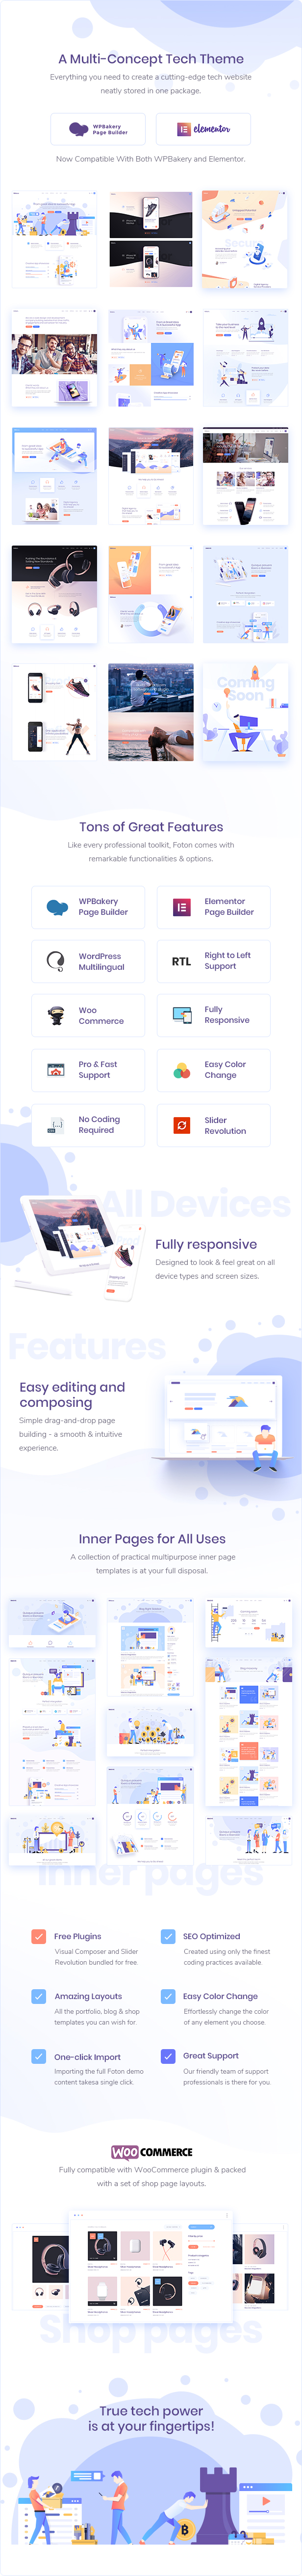 Foton - Software and App Landing Page Theme - 1